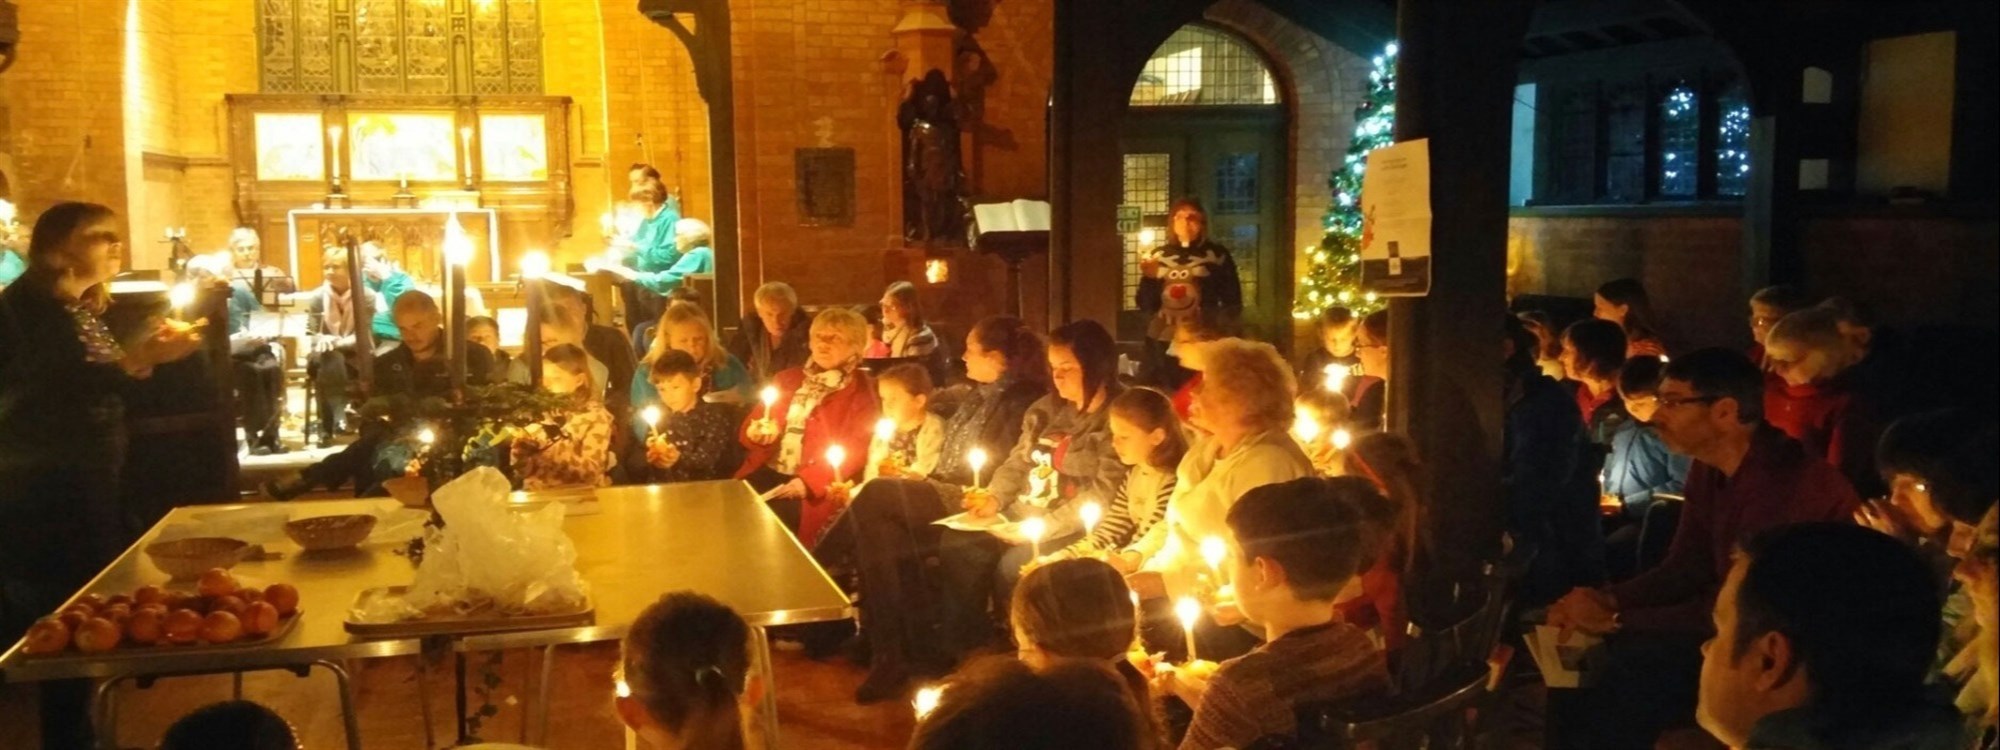 Christingle Service*Supporting the work of The Children's Society